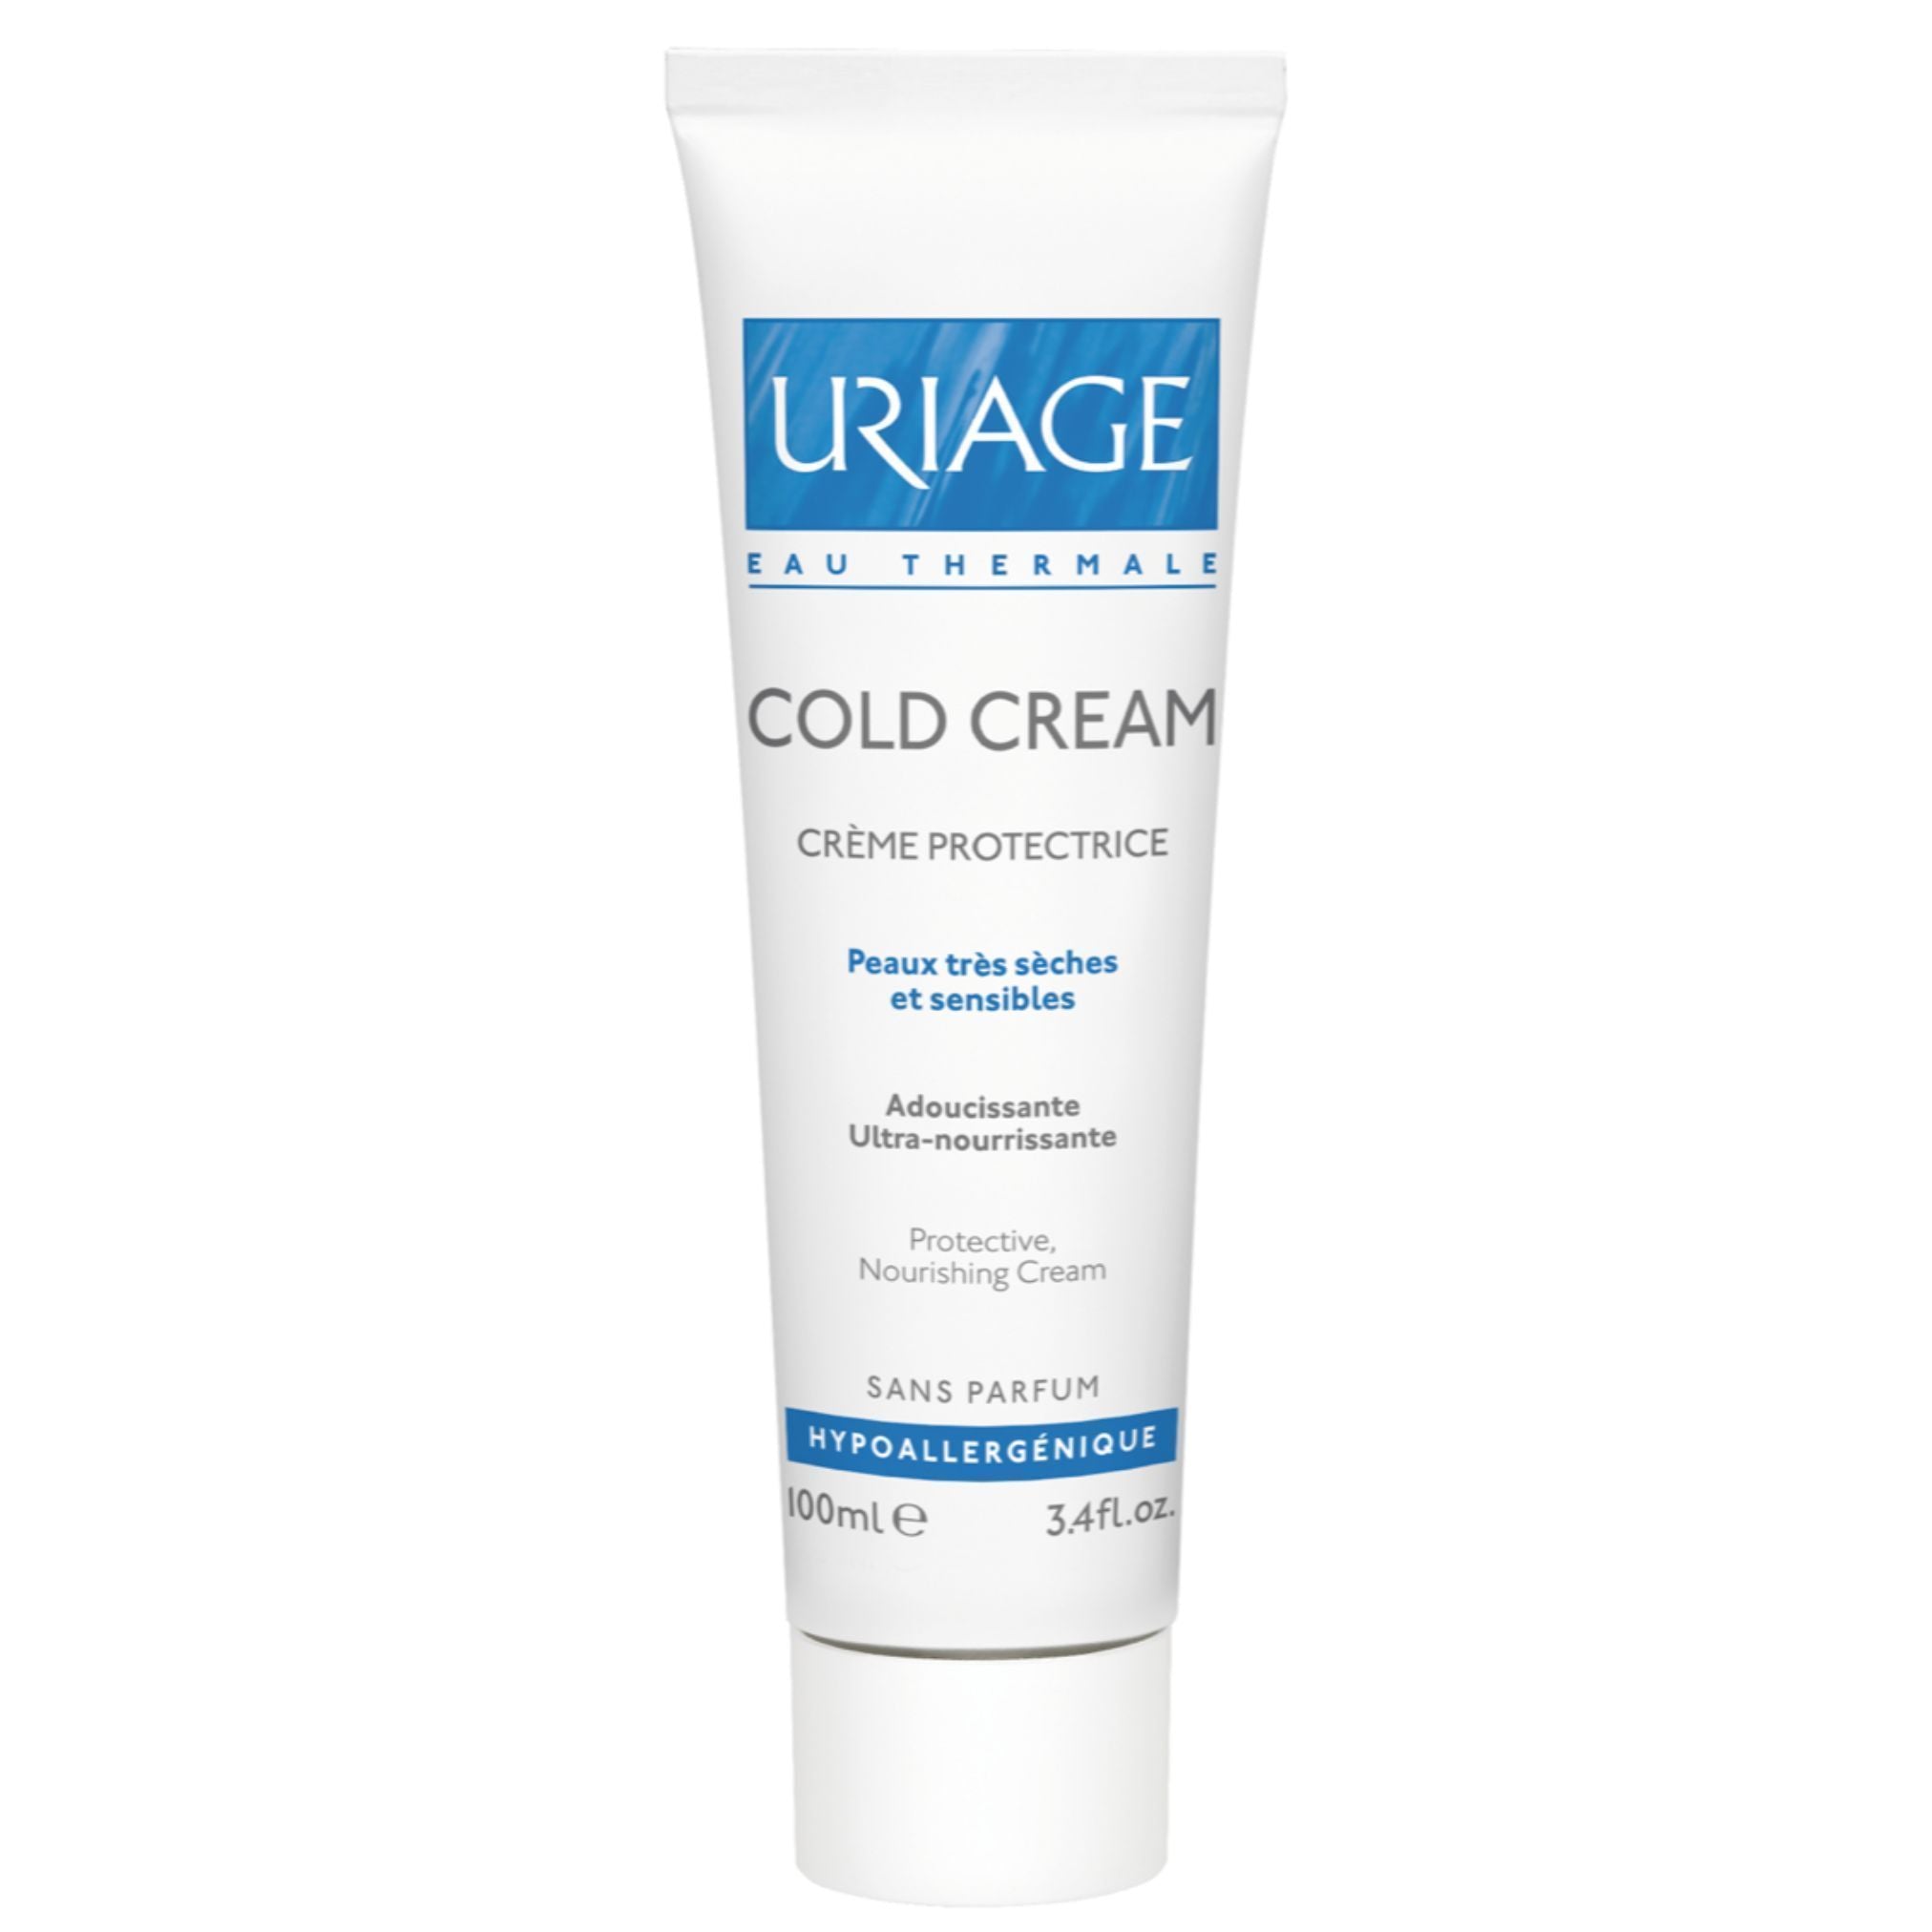 Uriage Eau Thermale Cold Cream 100 ml